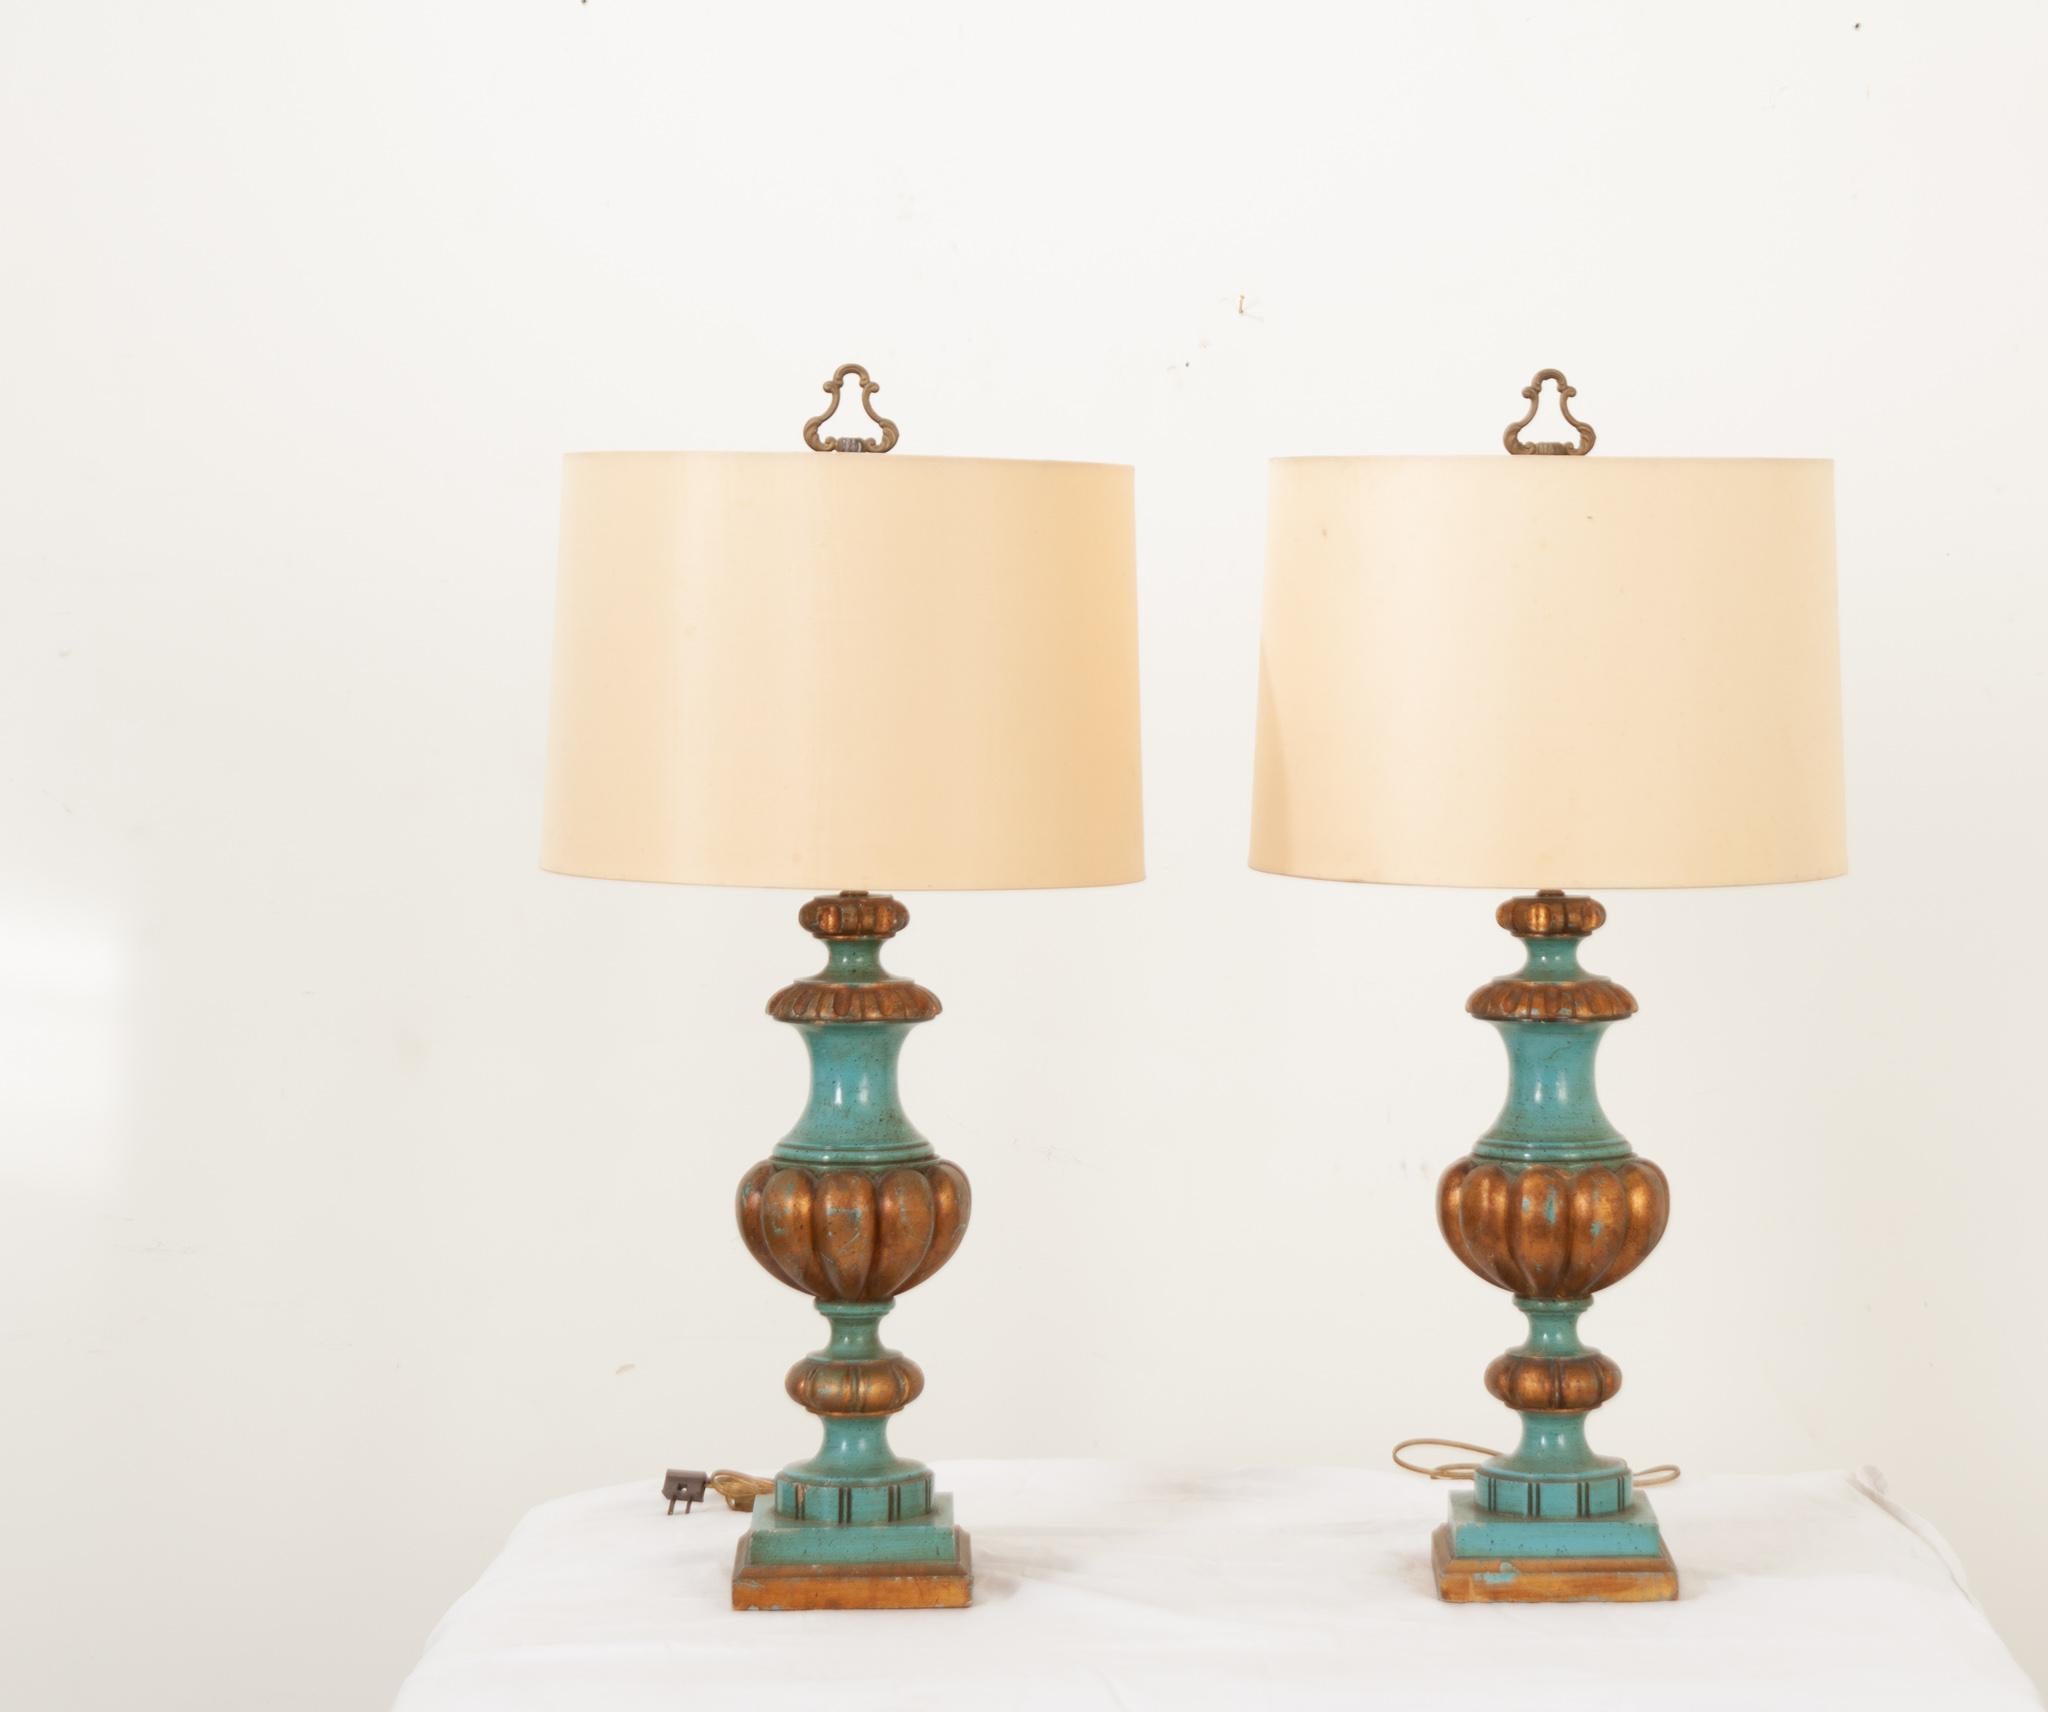 A pair of hand-painted turned wood column lamps made in France. Each lamp’s body showcases an intricately turned silhouette and a warm brown and teal finish for a unique design. The shade has been gently used and does have some wear. Professionally